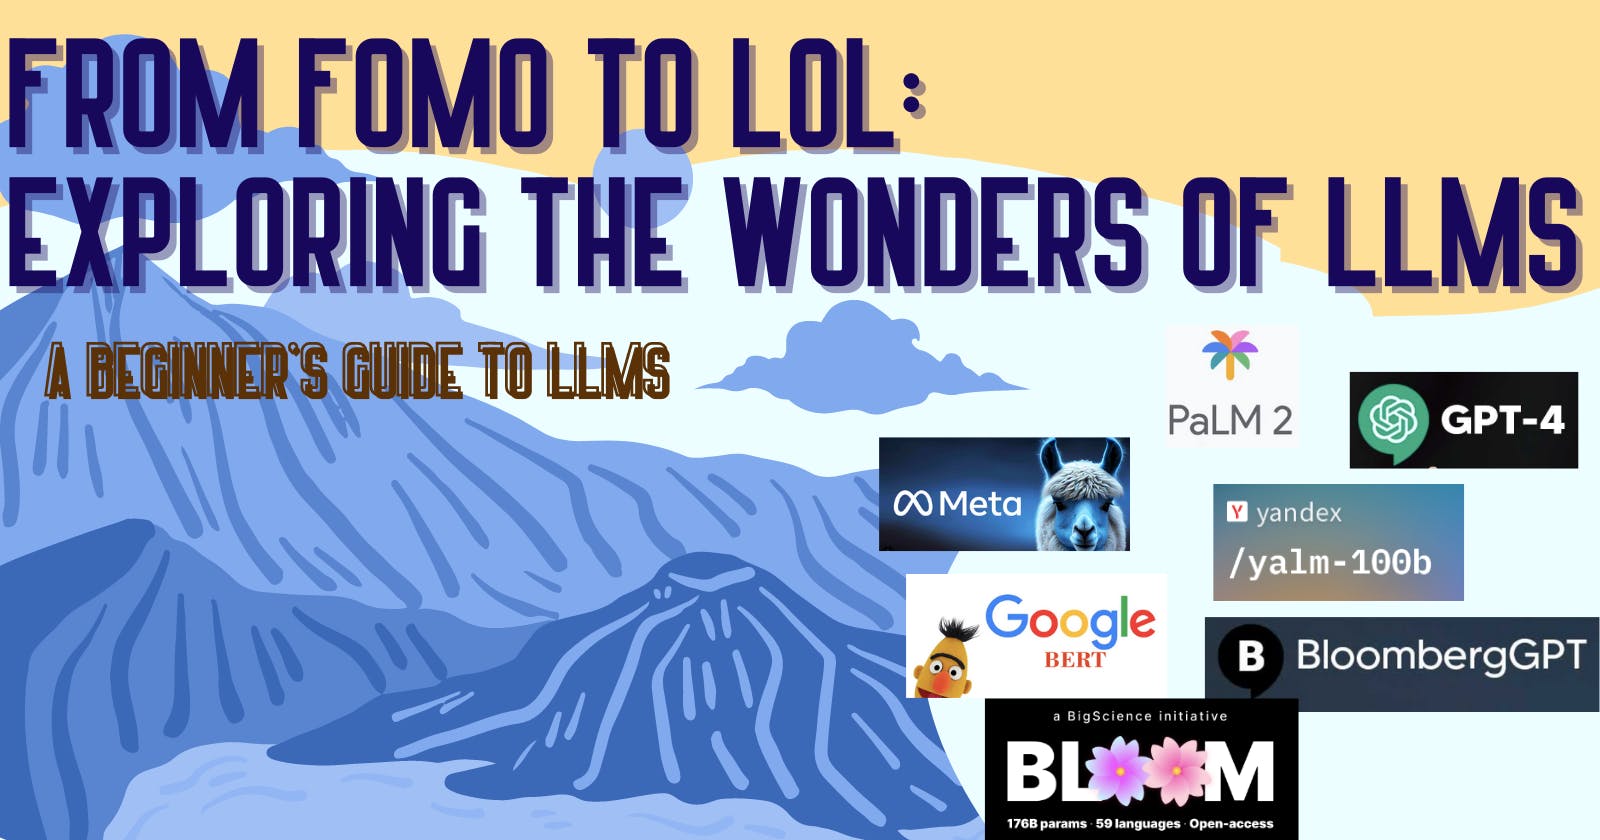 From FOMO to LOL: Exploring the Wonders of LLMs